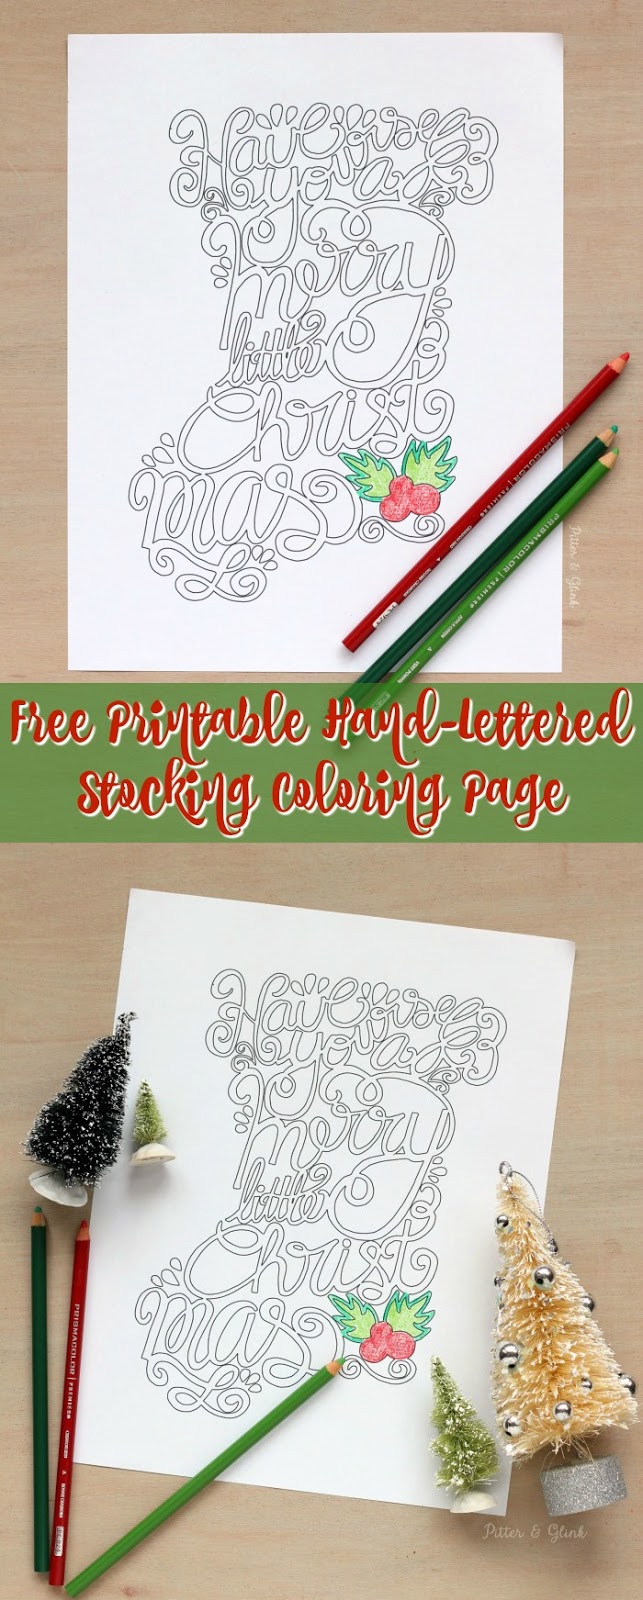 Free Printable Hand-Lettered Stocking Coloring Page--Download your copy today to color while you wait for Santa! | www.pitterandglink.com